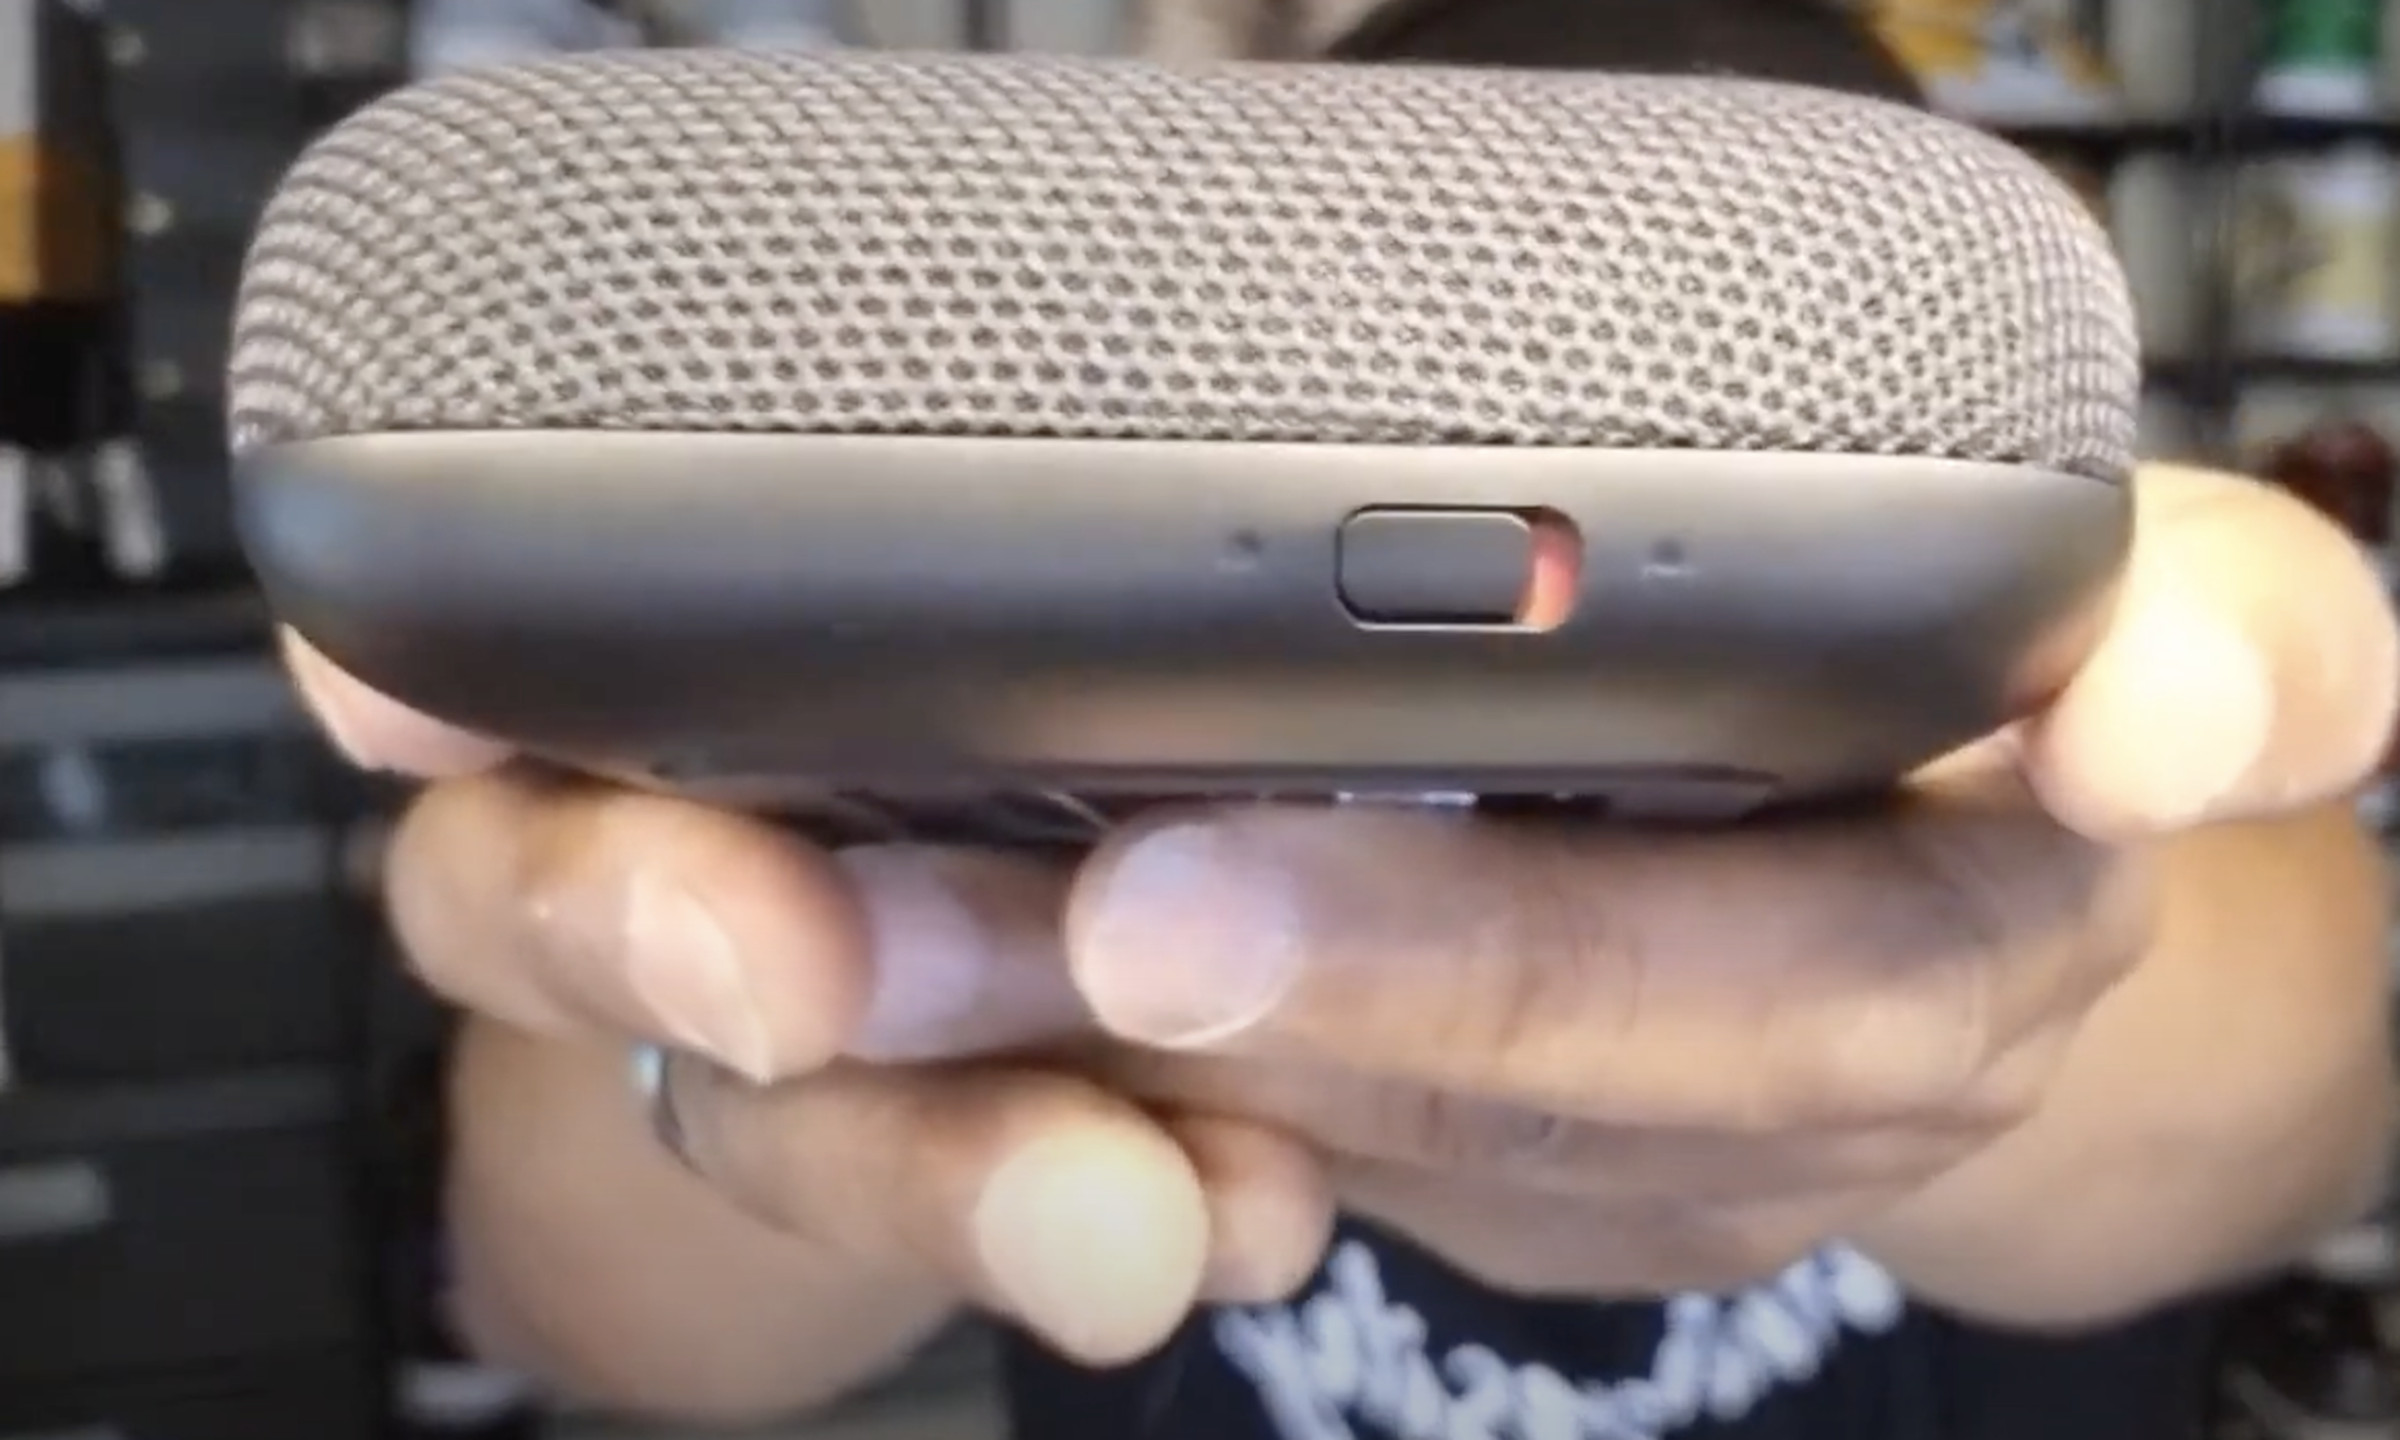 A screenshot from the video showing the microphone switch on the front of the Onn Pro.